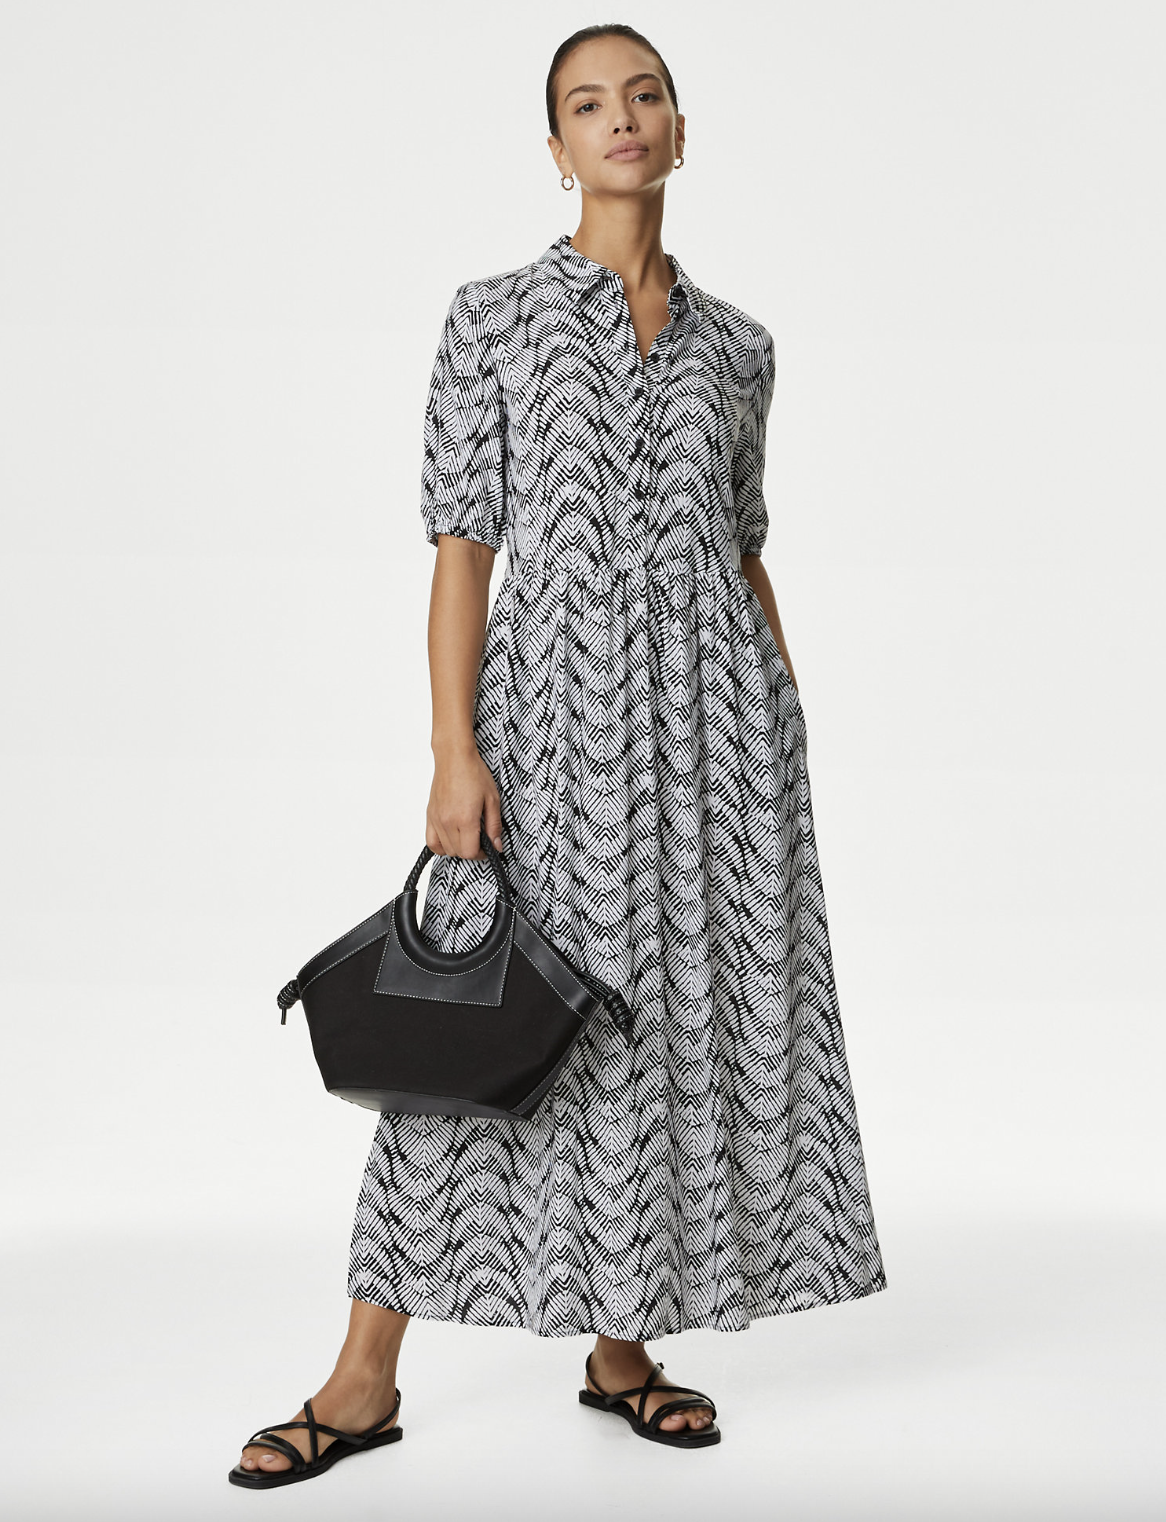 You can't go wrong with a classic midi shirt dress. (Marks & Spencer)